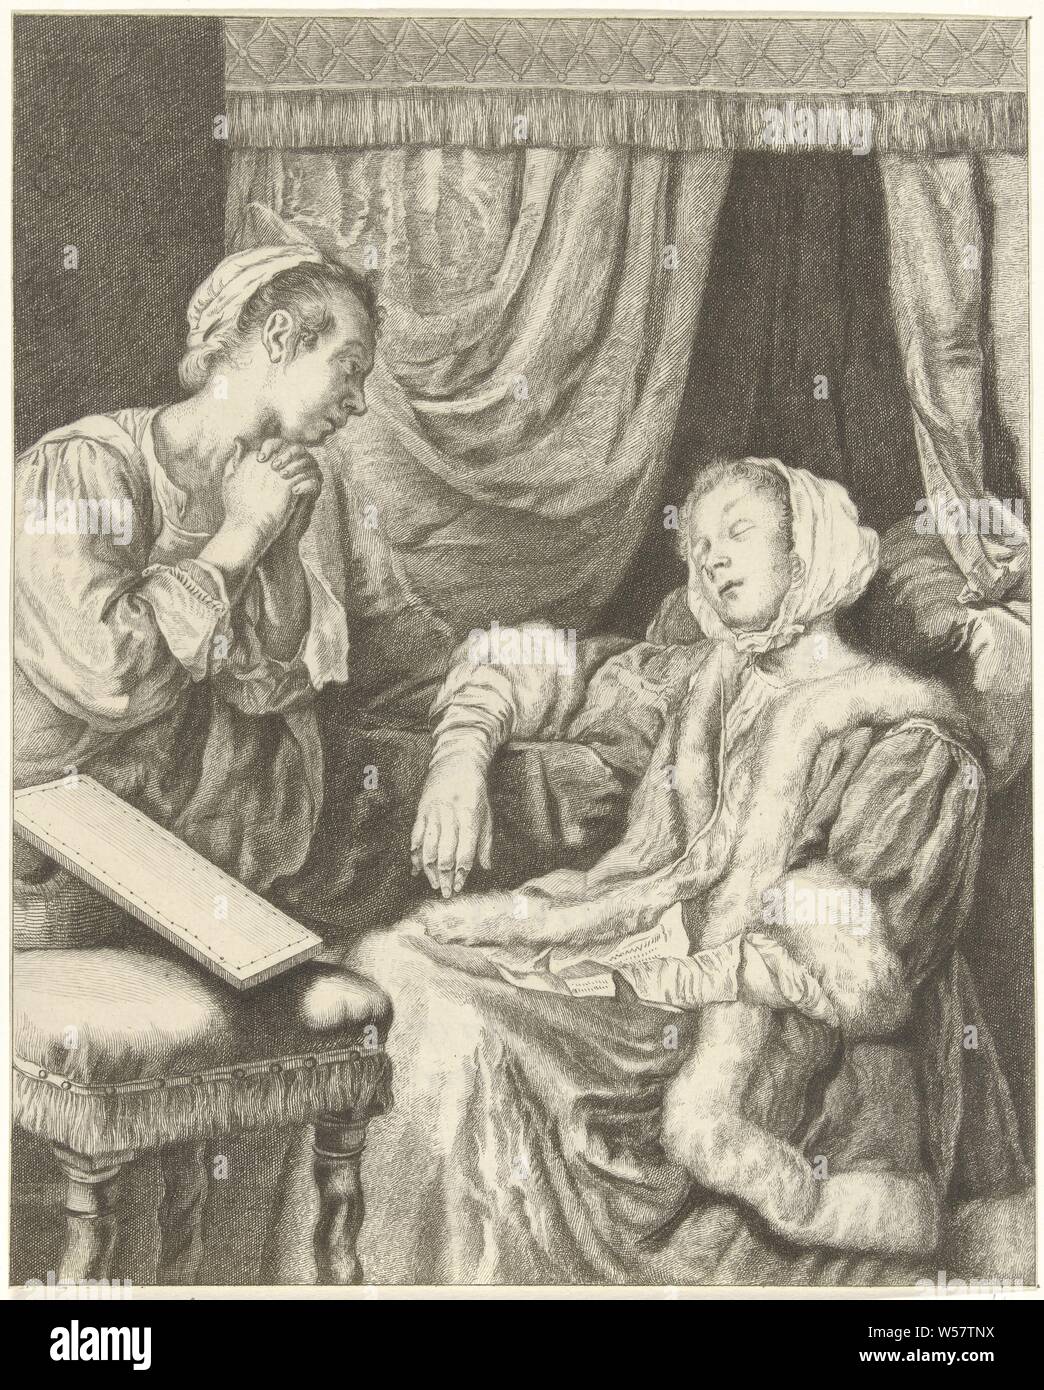 Interior with two women Lady in powerlessness, Interior with a sleeping woman by a bedstead. A letter is on her lap. Her maid watches, sleeping in chair, maid, house personnel, Christiaan Josi (mentioned on object), Noord-Nederland, 1821, paper, drypoint, h 225 mm × w 182 mm Stock Photo